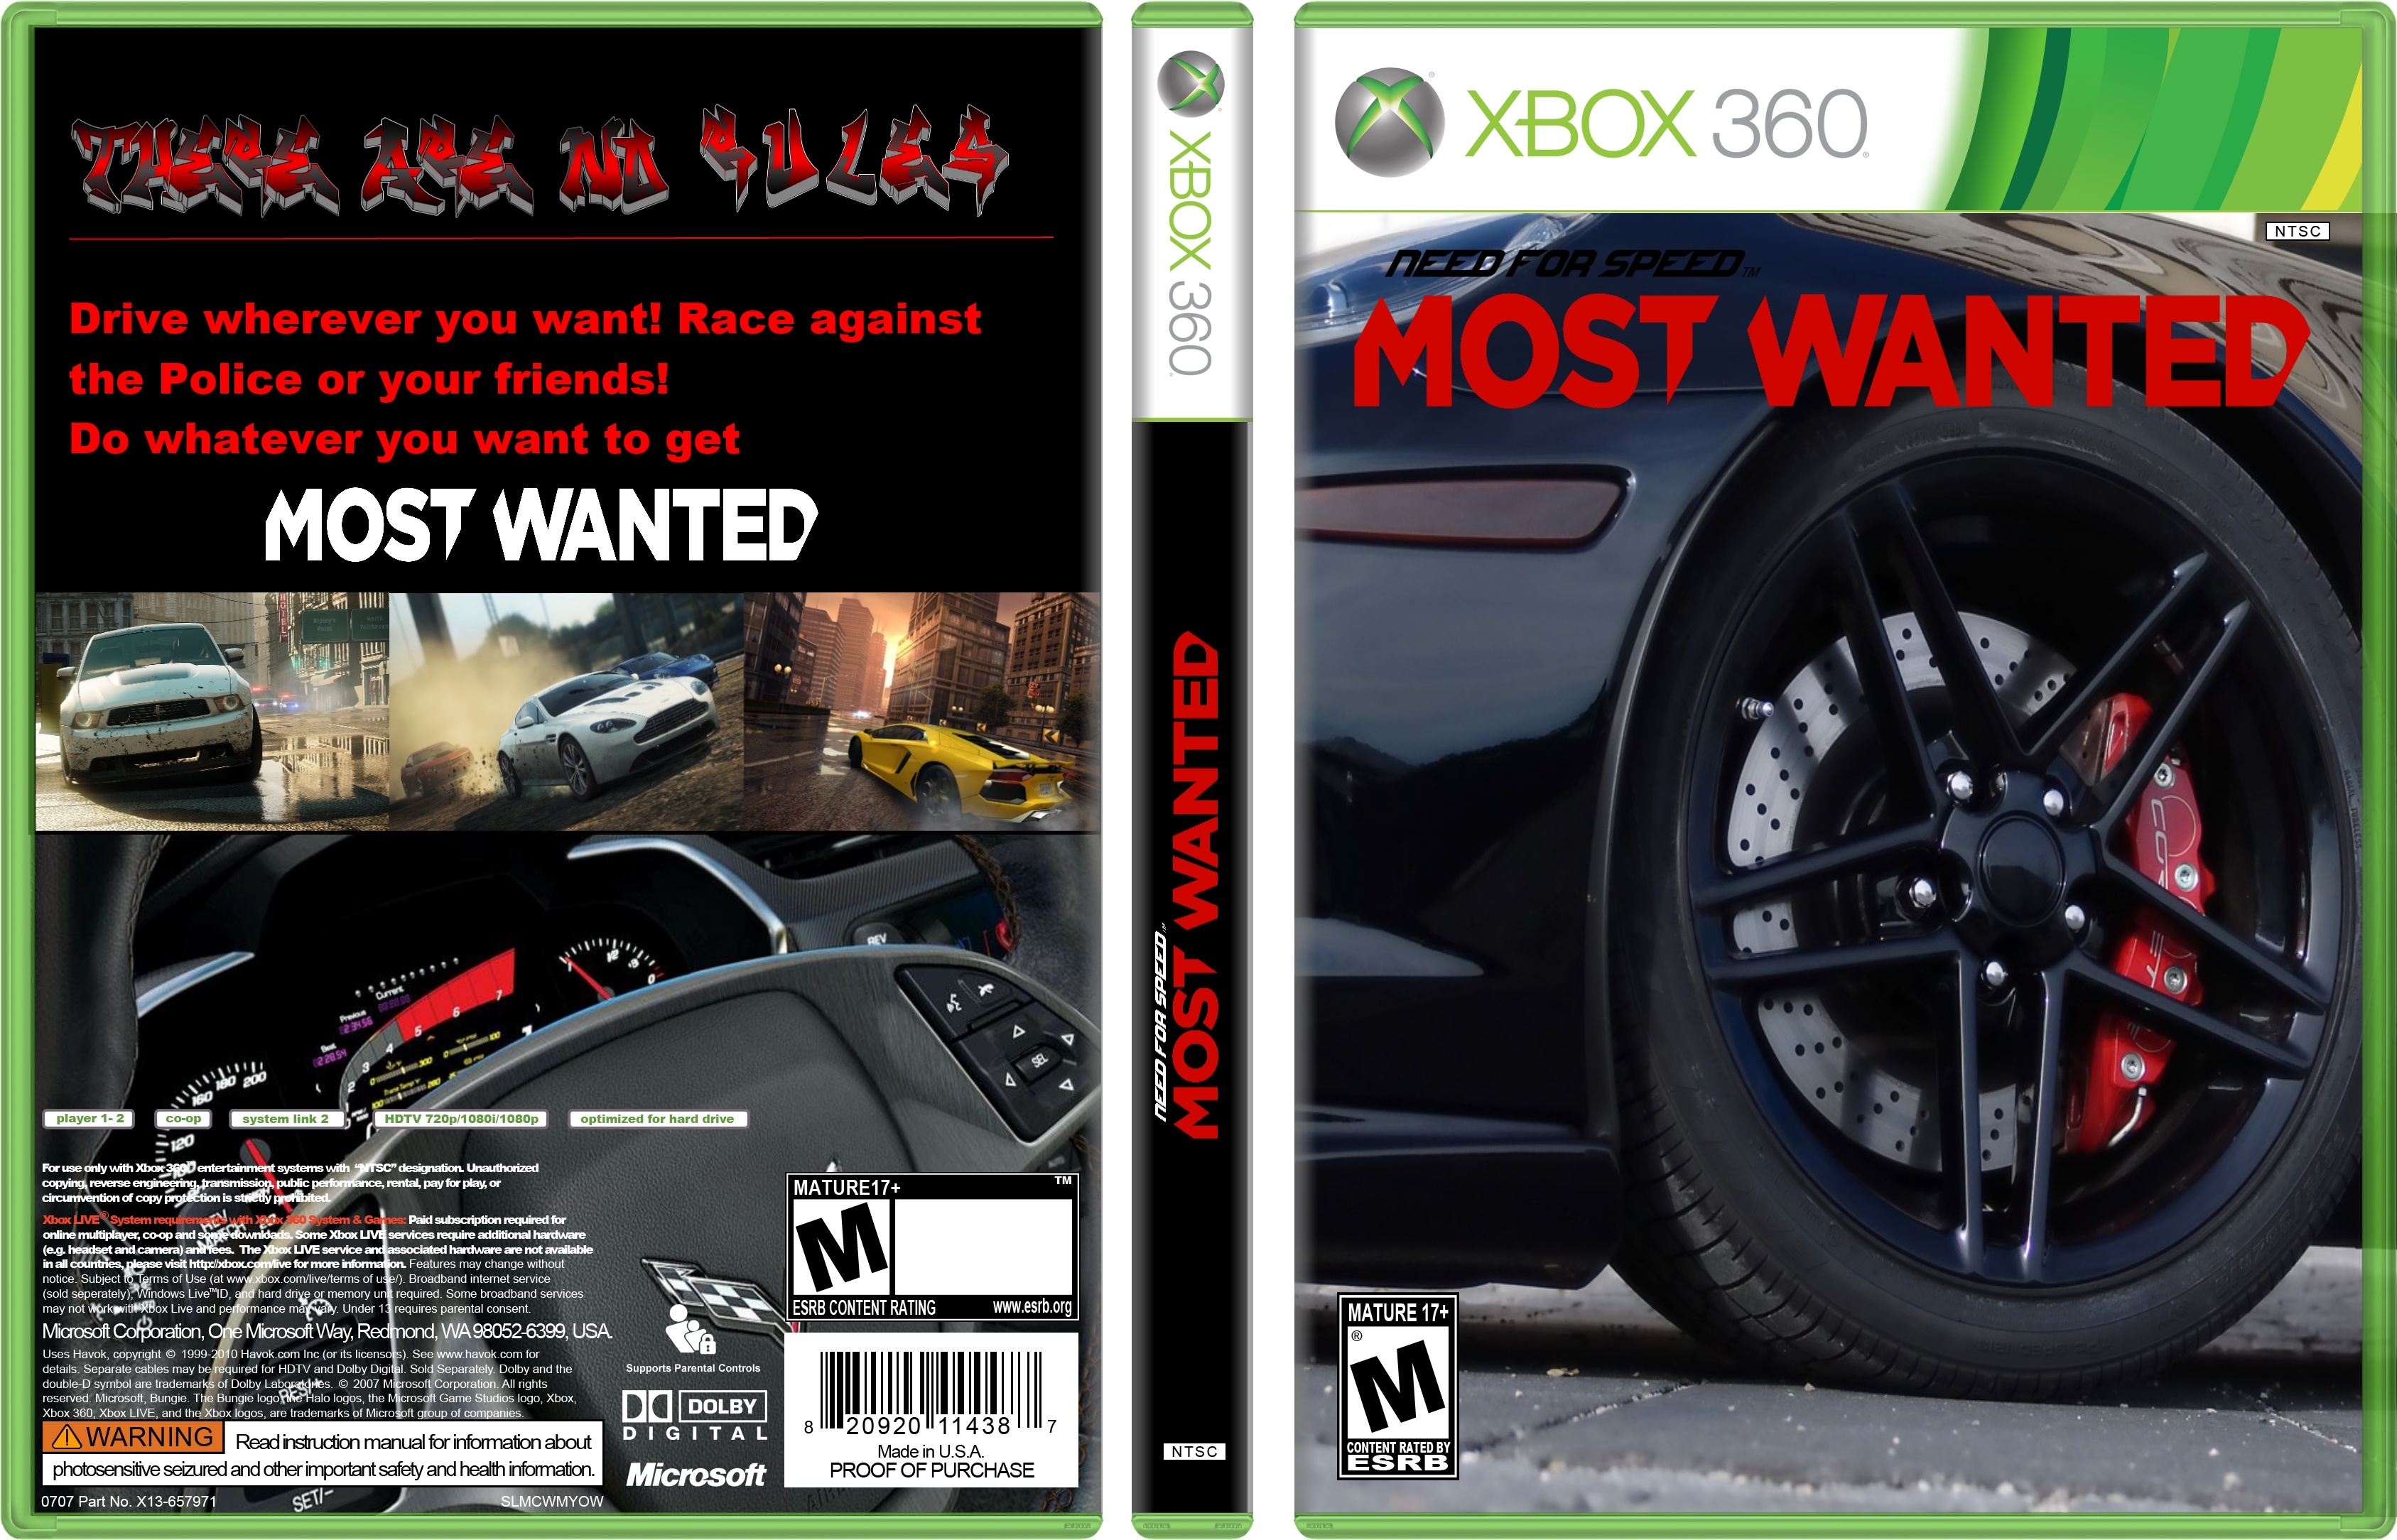 Nfs most wanted xbox. Need for Speed most wanted Xbox 360. NFS most wanted диск Xbox 360. Need for Speed most wanted Xbox 360 обложка. Need for Speed most wanted 2005 Xbox 360 обложка.